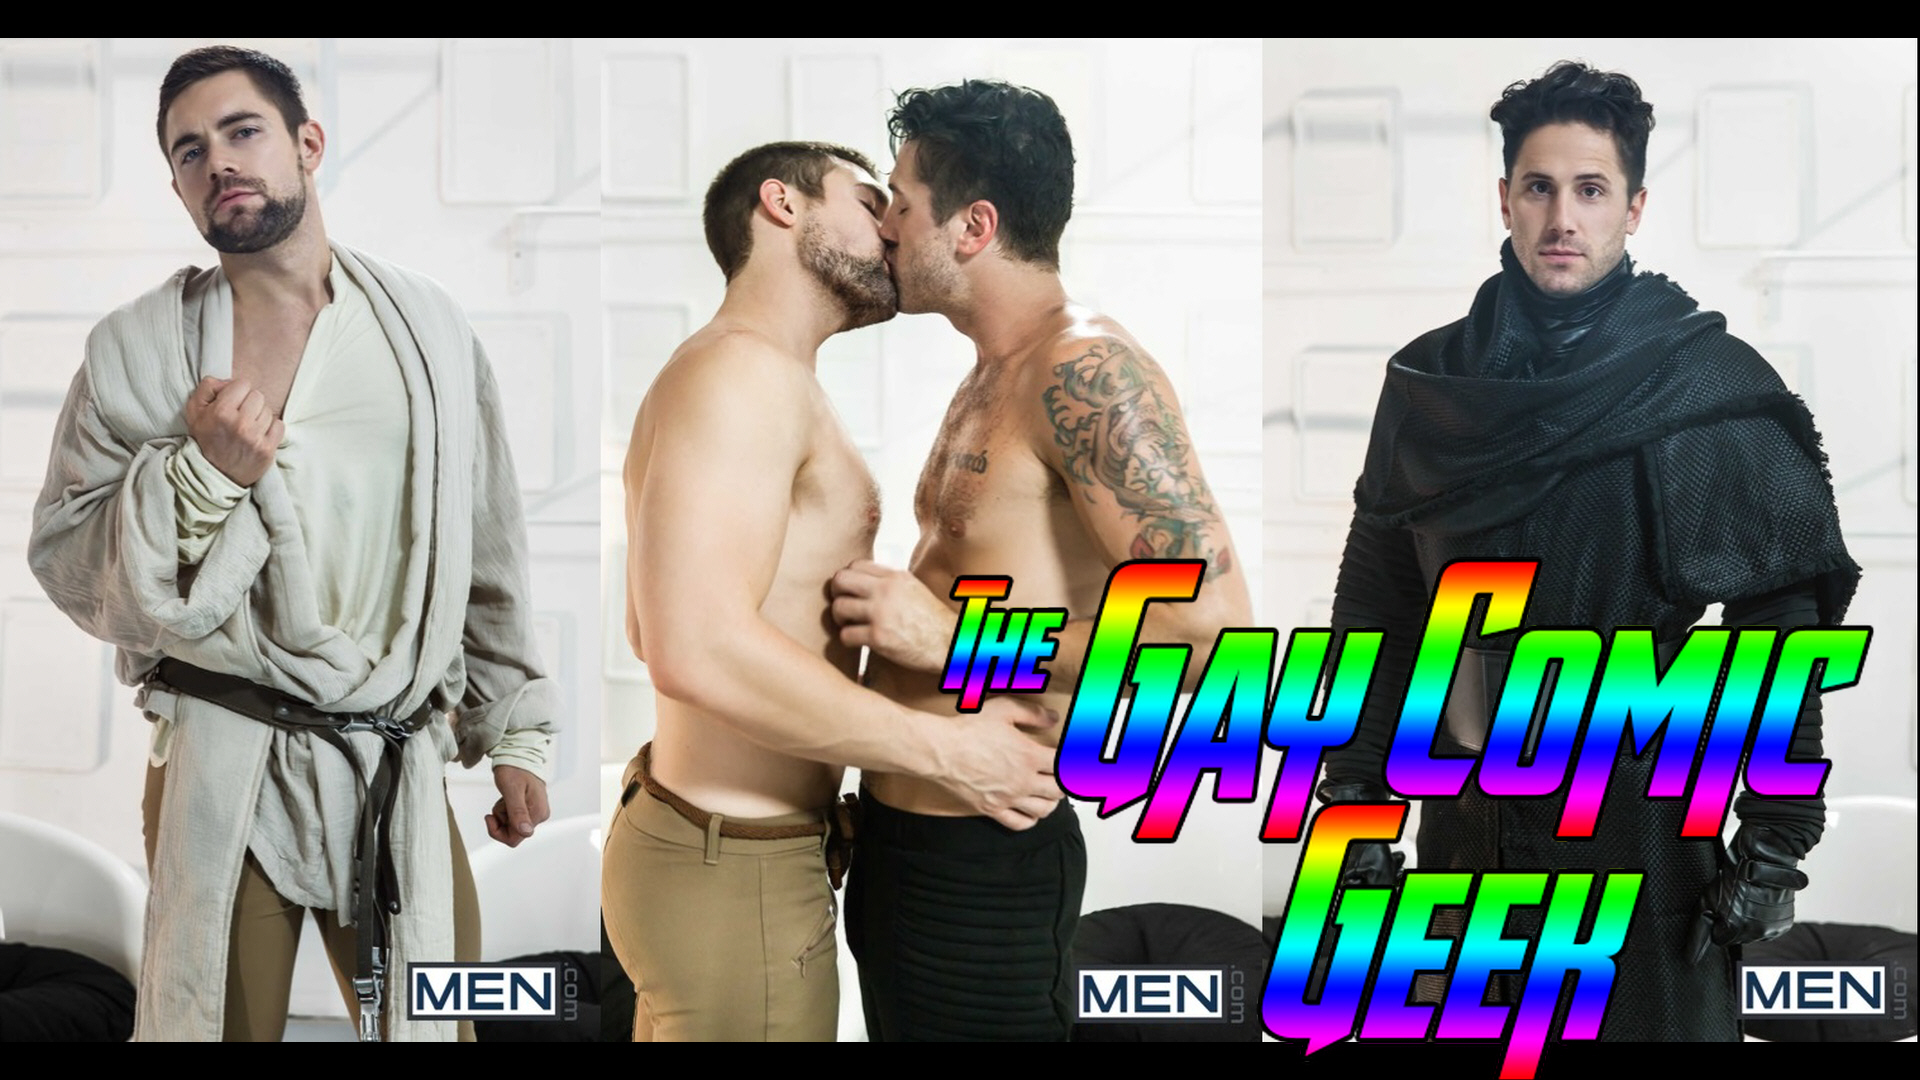 star wars a gay parody part the force awakens scene review gay comic geek